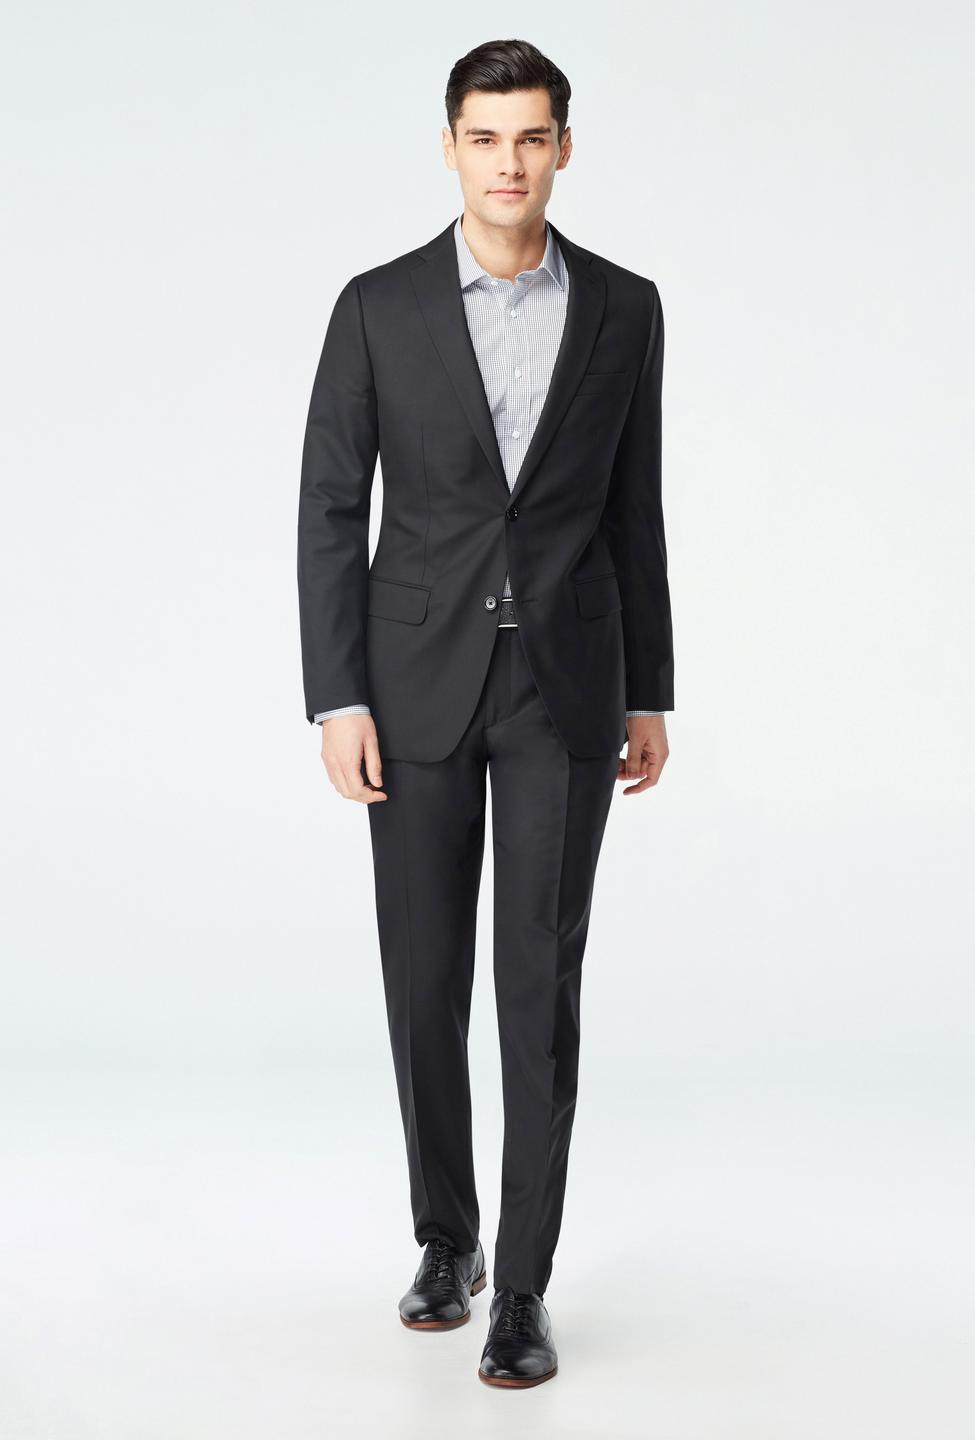 Black suit - Highbridge Solid Design from Luxury Indochino Collection